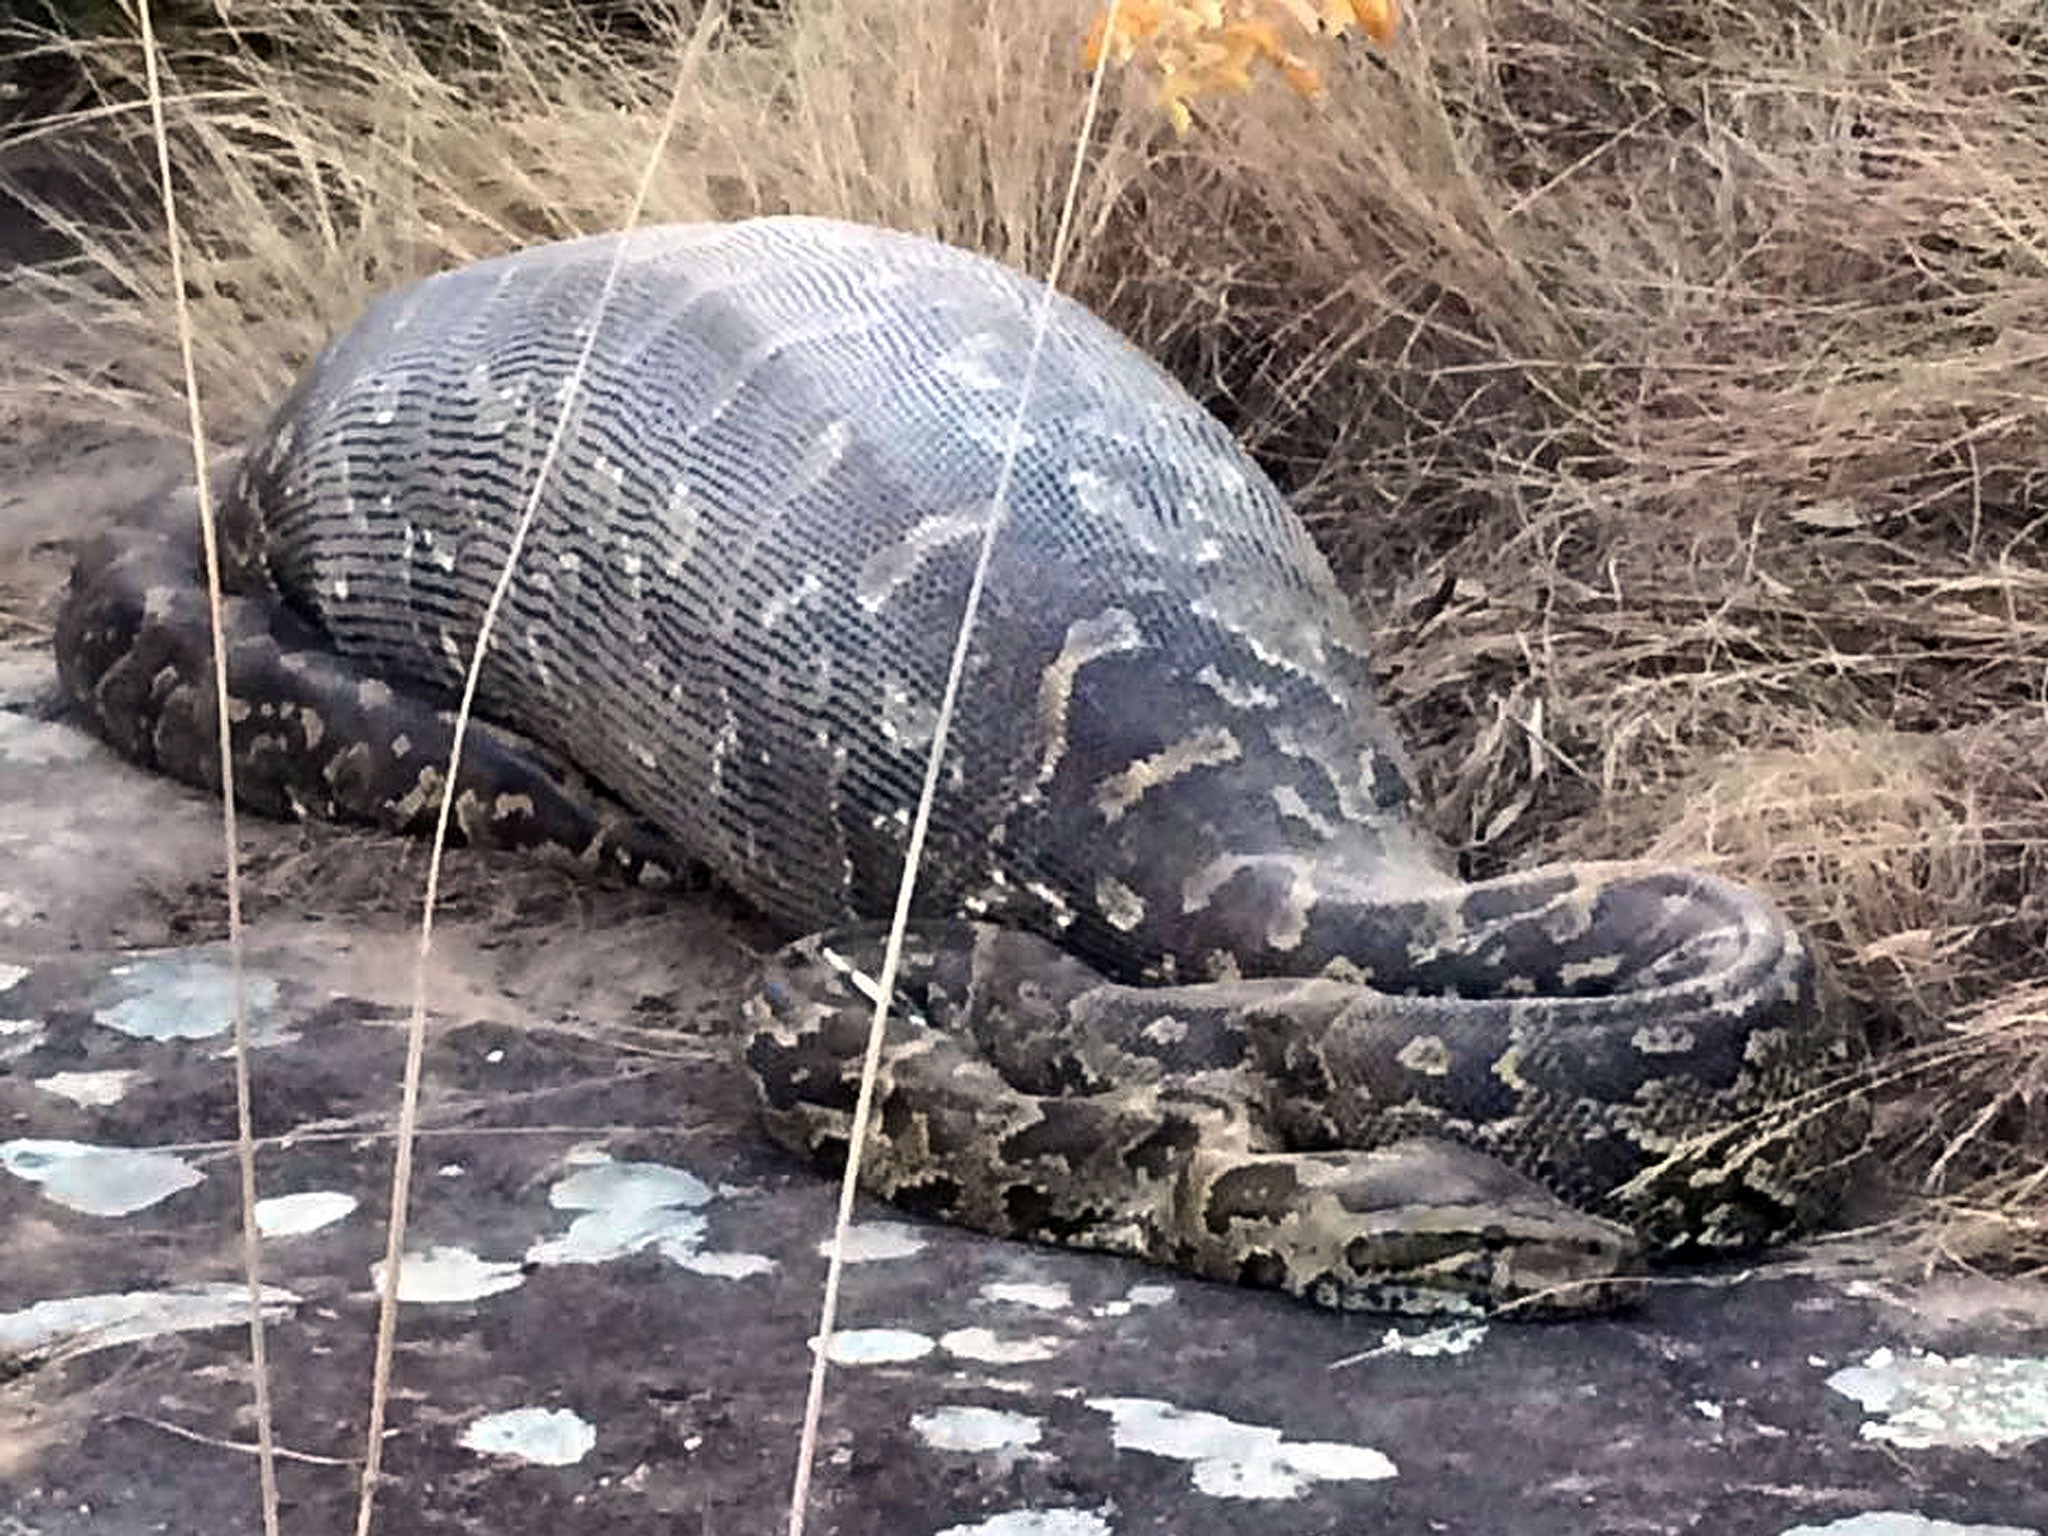 The bloated 3.9 metre African rock python was found by a mountain biker, lying next to a cycle track at Lake Eland Game Reserve, near Port Shepstone